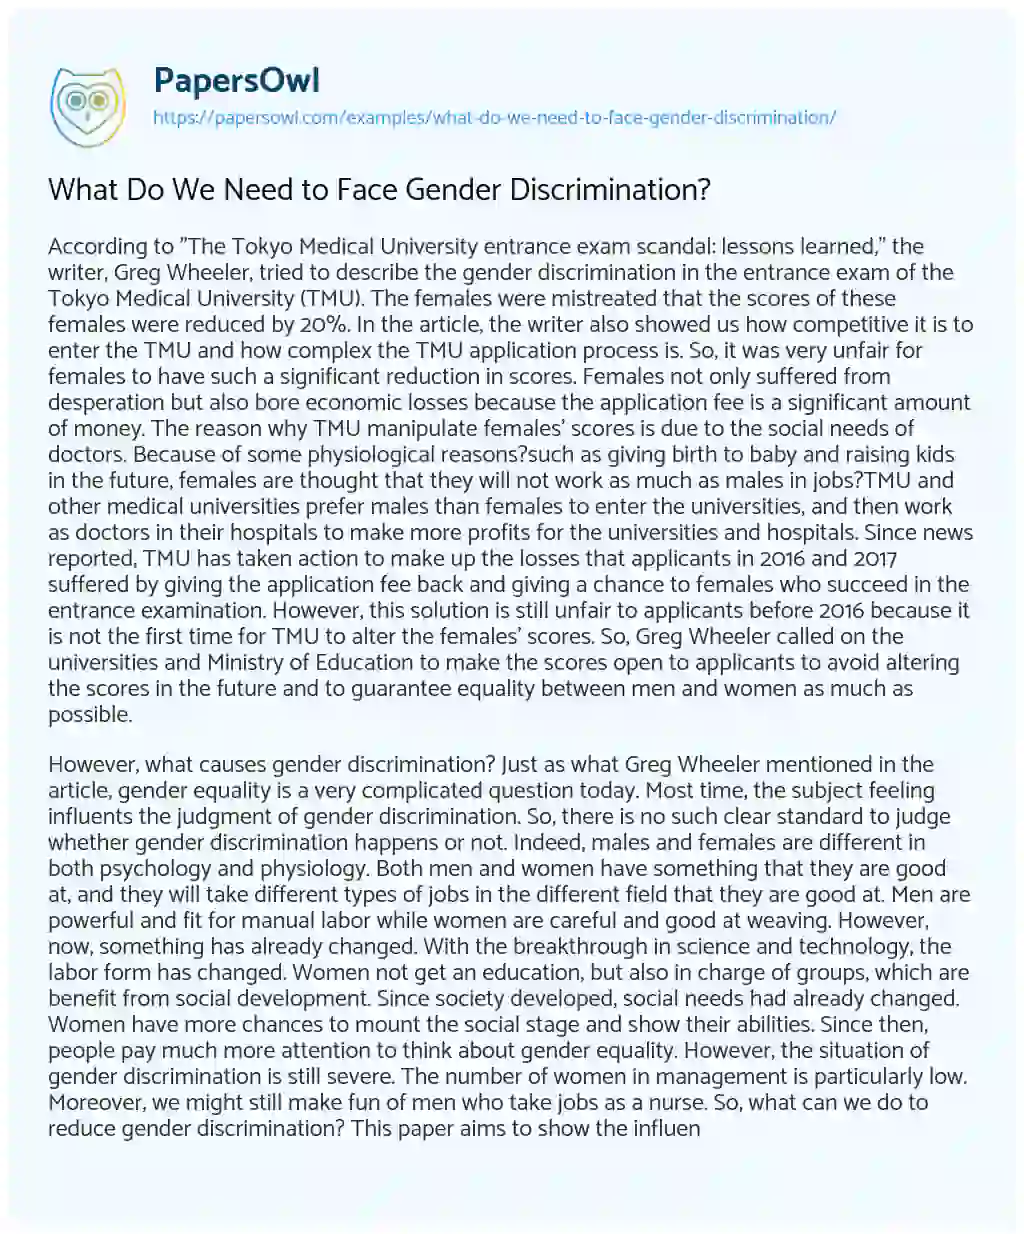 Essay on What do we Need to Face Gender Discrimination?